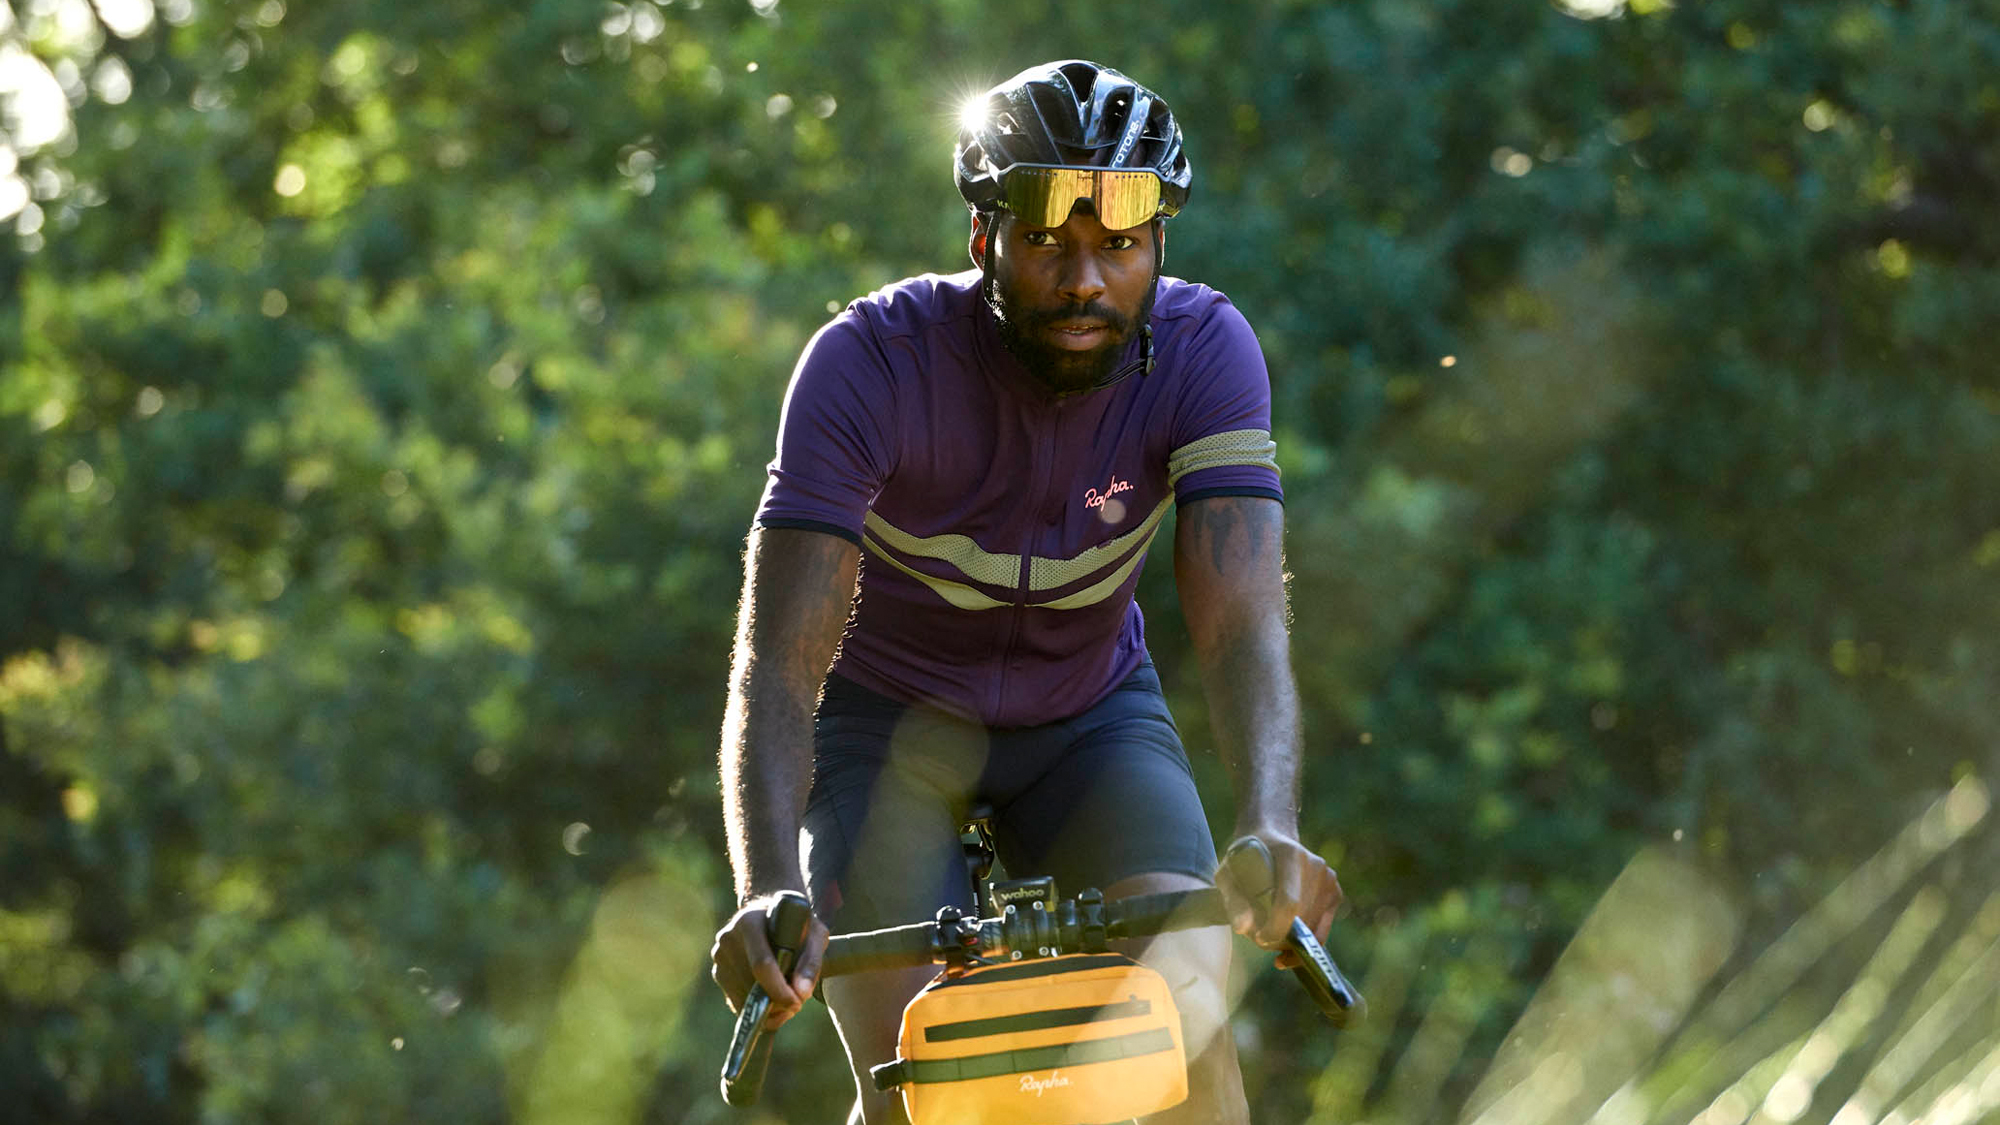 Best cycling clothing brands Our pick of top companies making a positive impact |